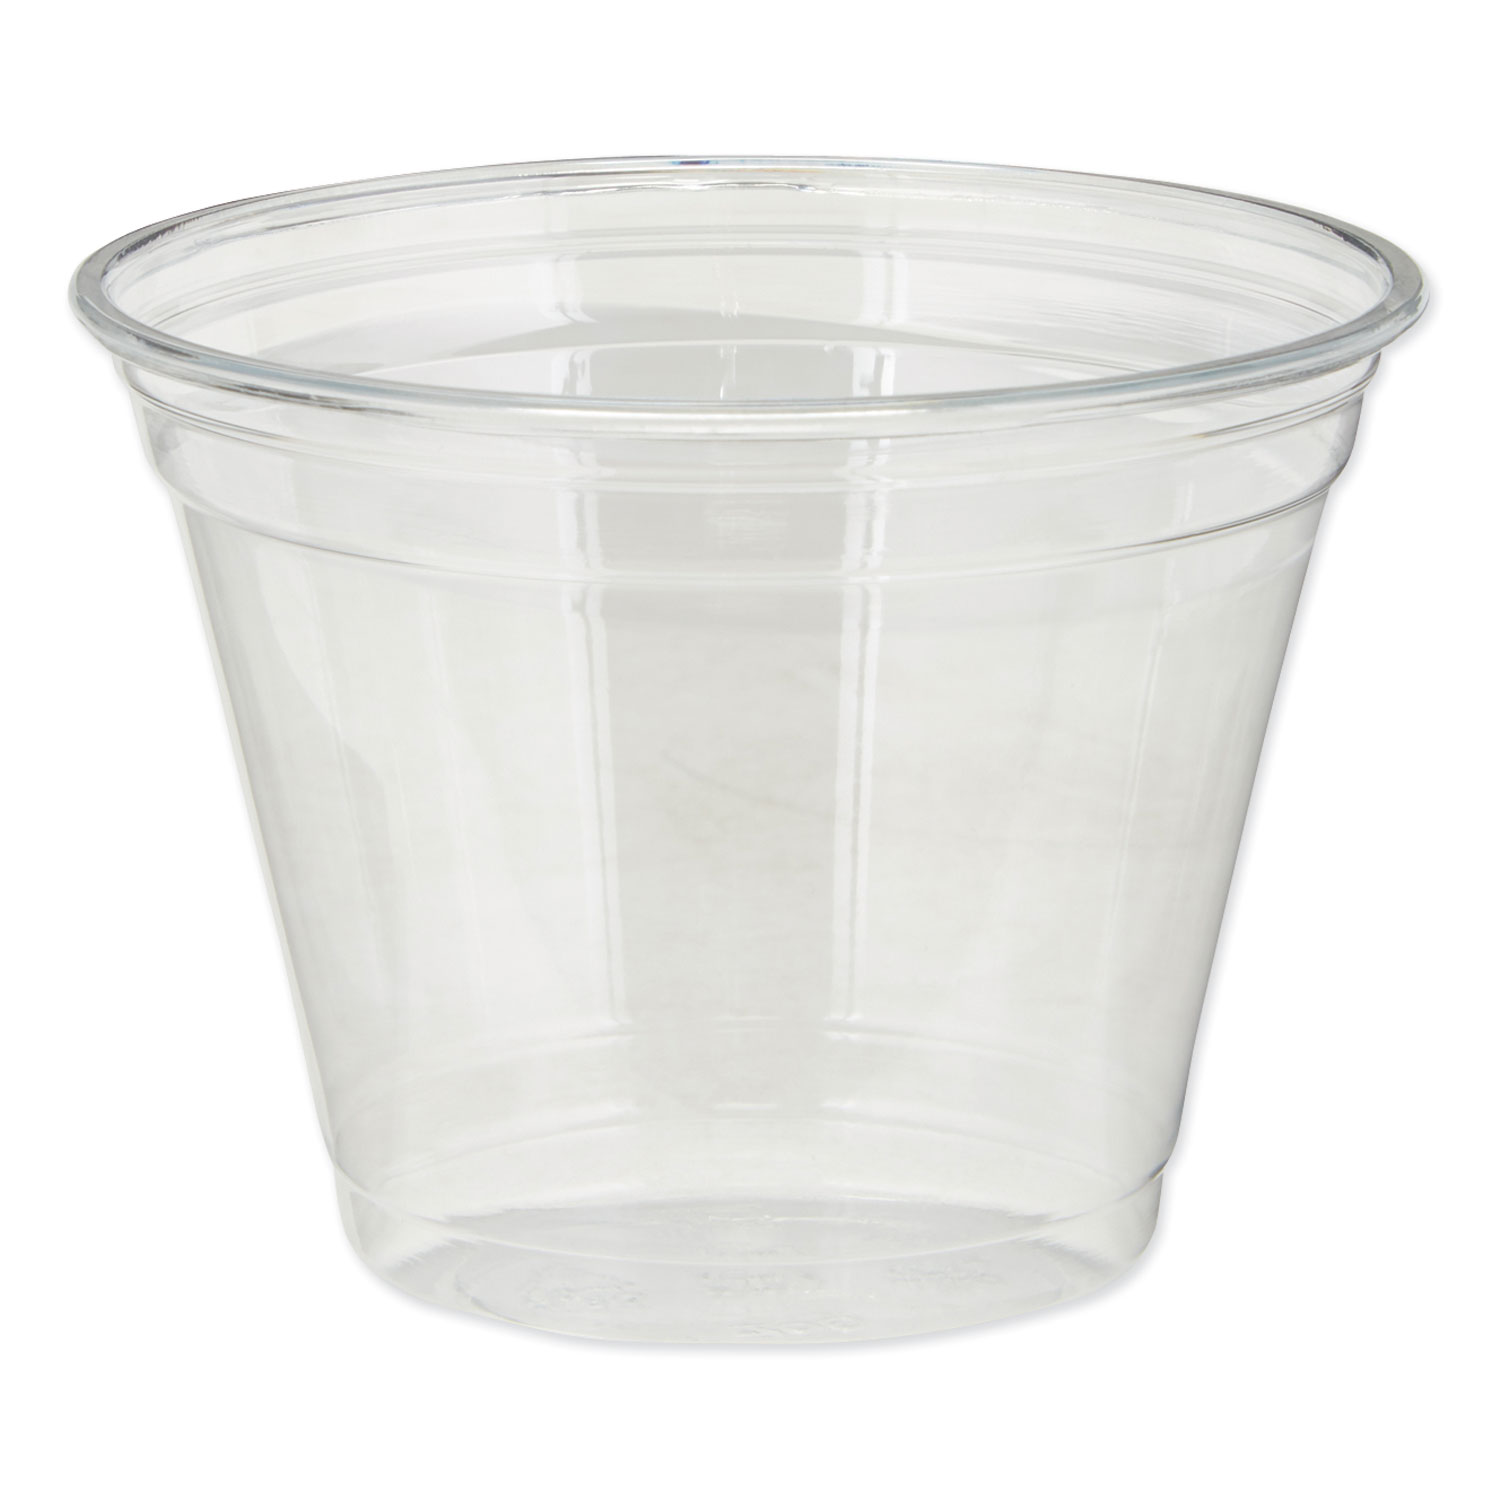  Dixie CPET9 Clear Plastic PETE Cups, Cold, 9oz, Squat, 50/Sleeve, 20 Sleeves/Carton (DXECPET9) 